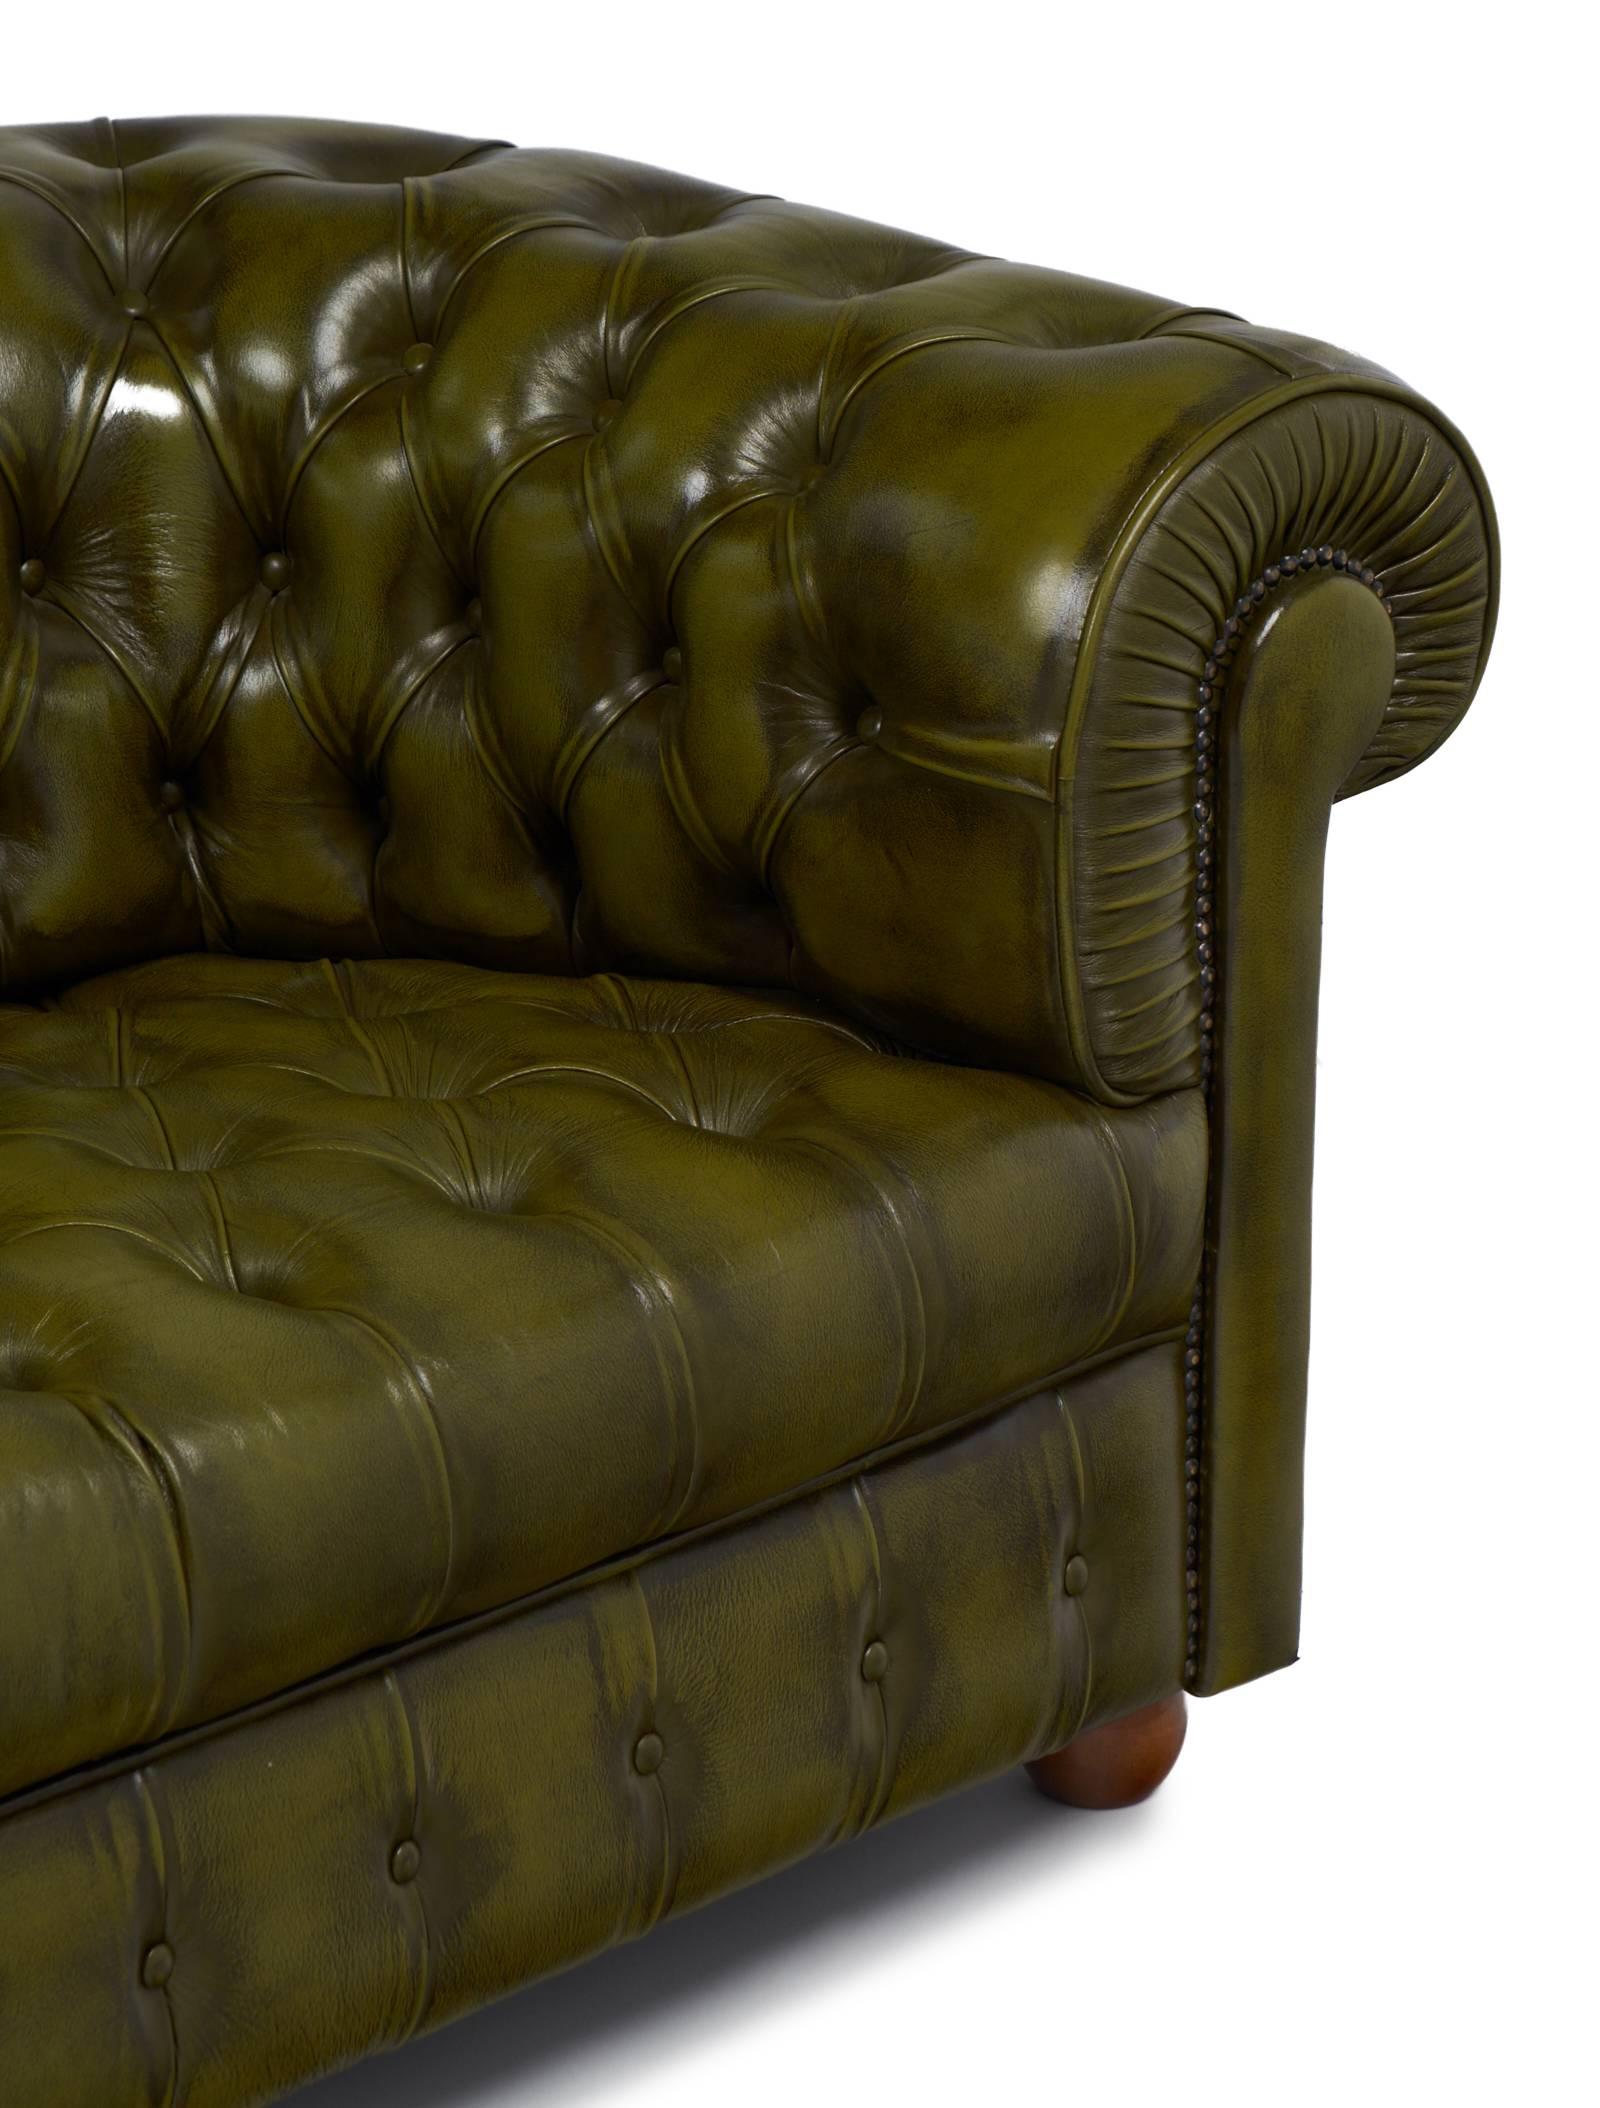 Brass Vintage Green Leather Chesterfield Sofa